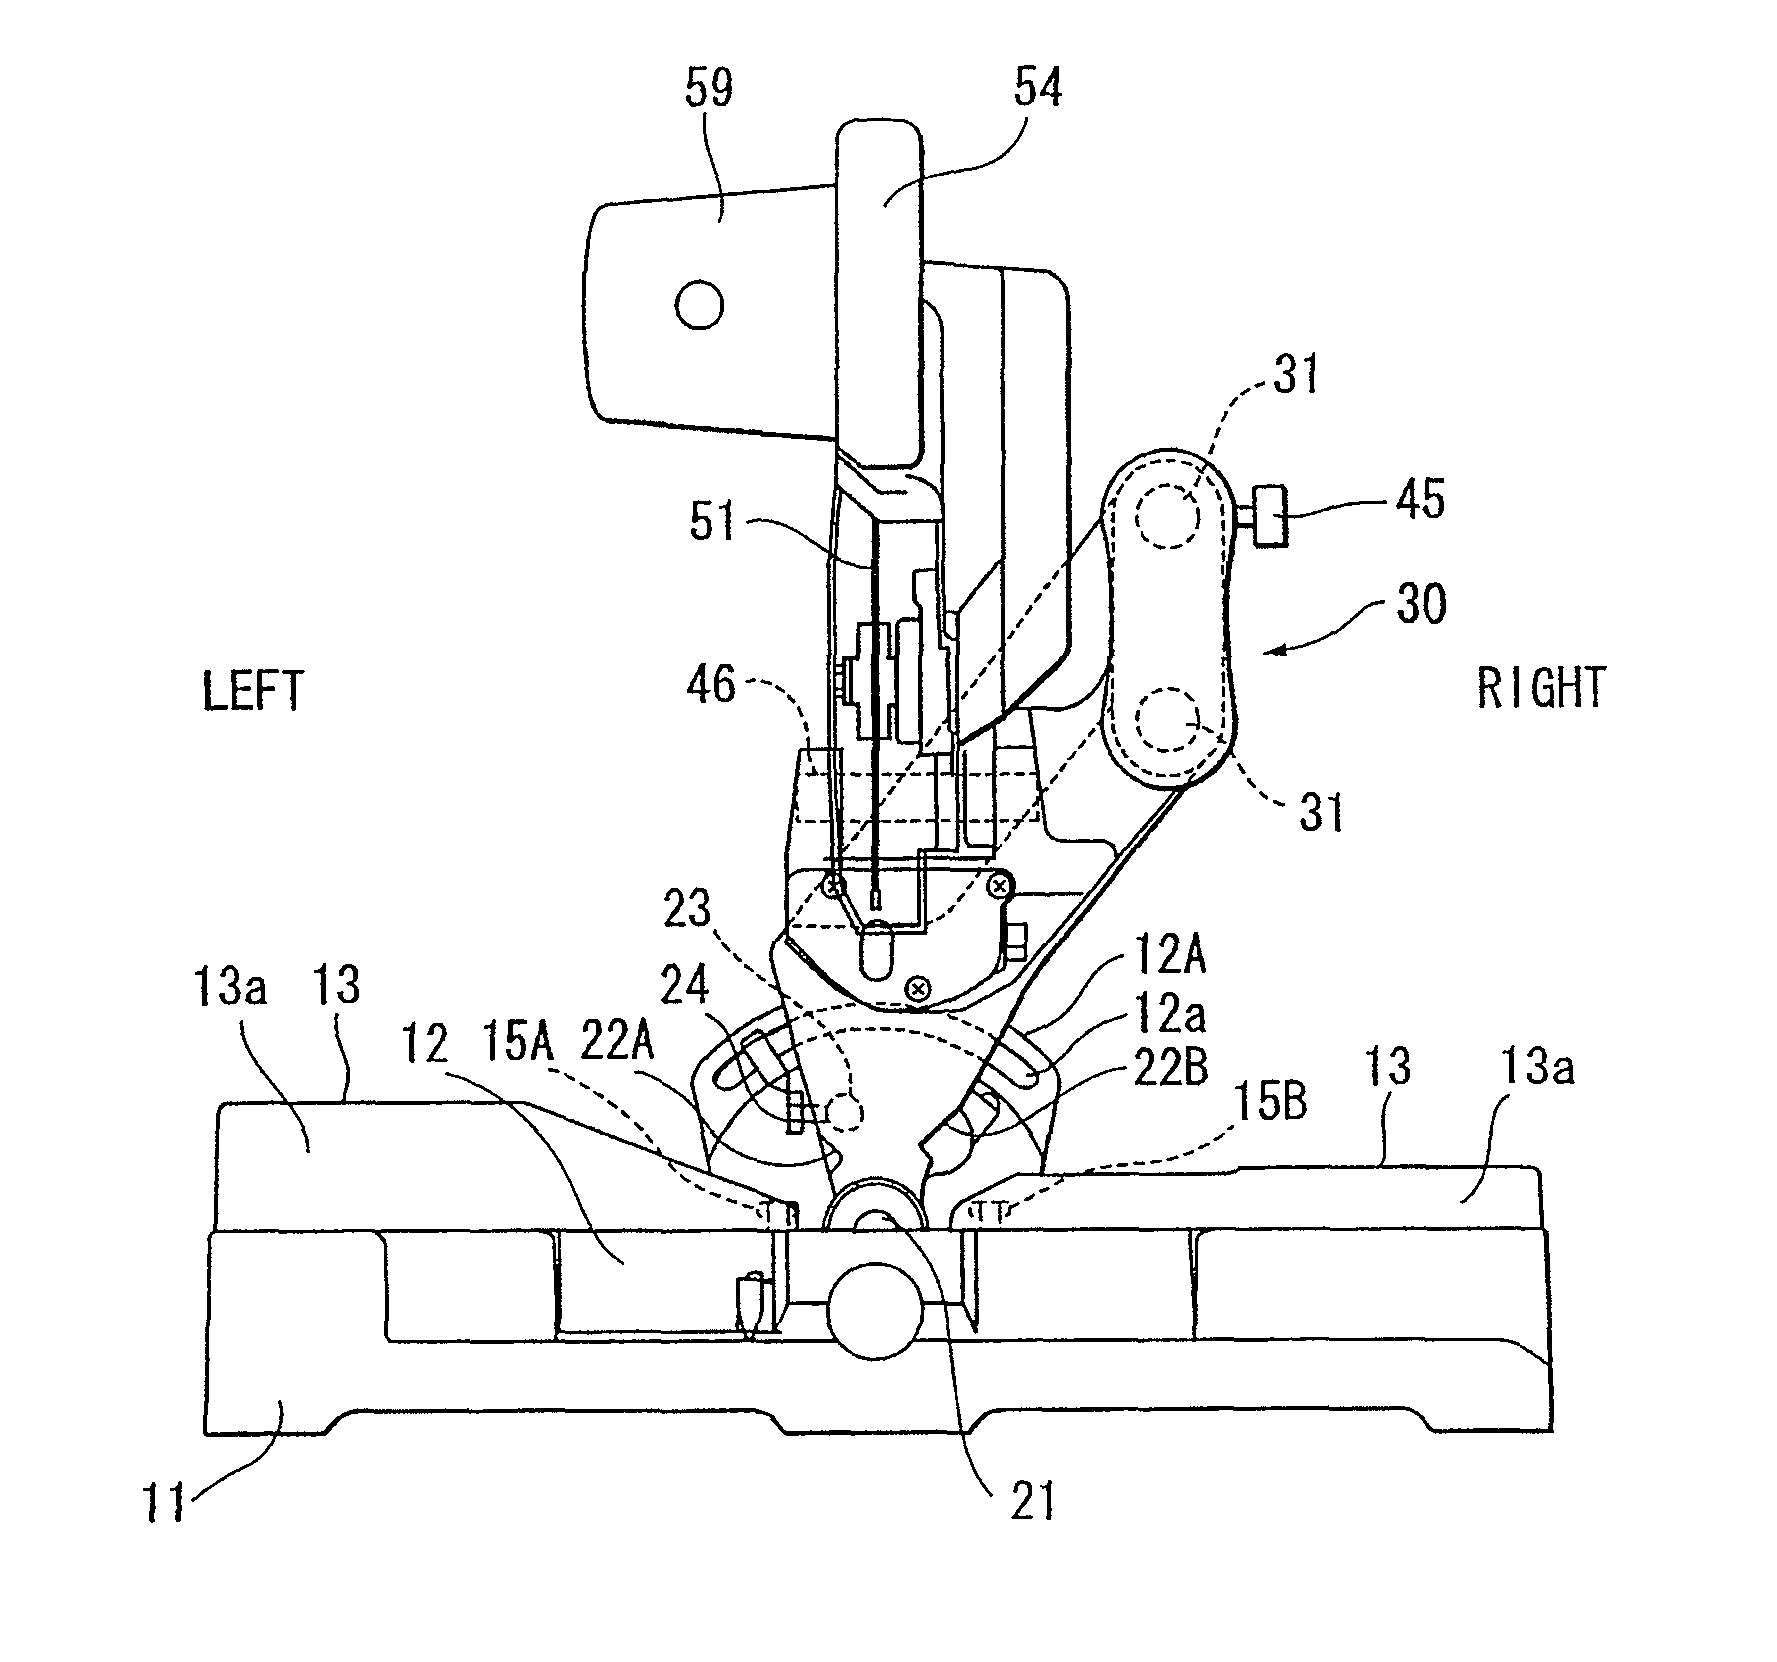 Miter saw having circular saw blade section pivotally movable upward and downward and tiltable leftward and rightward